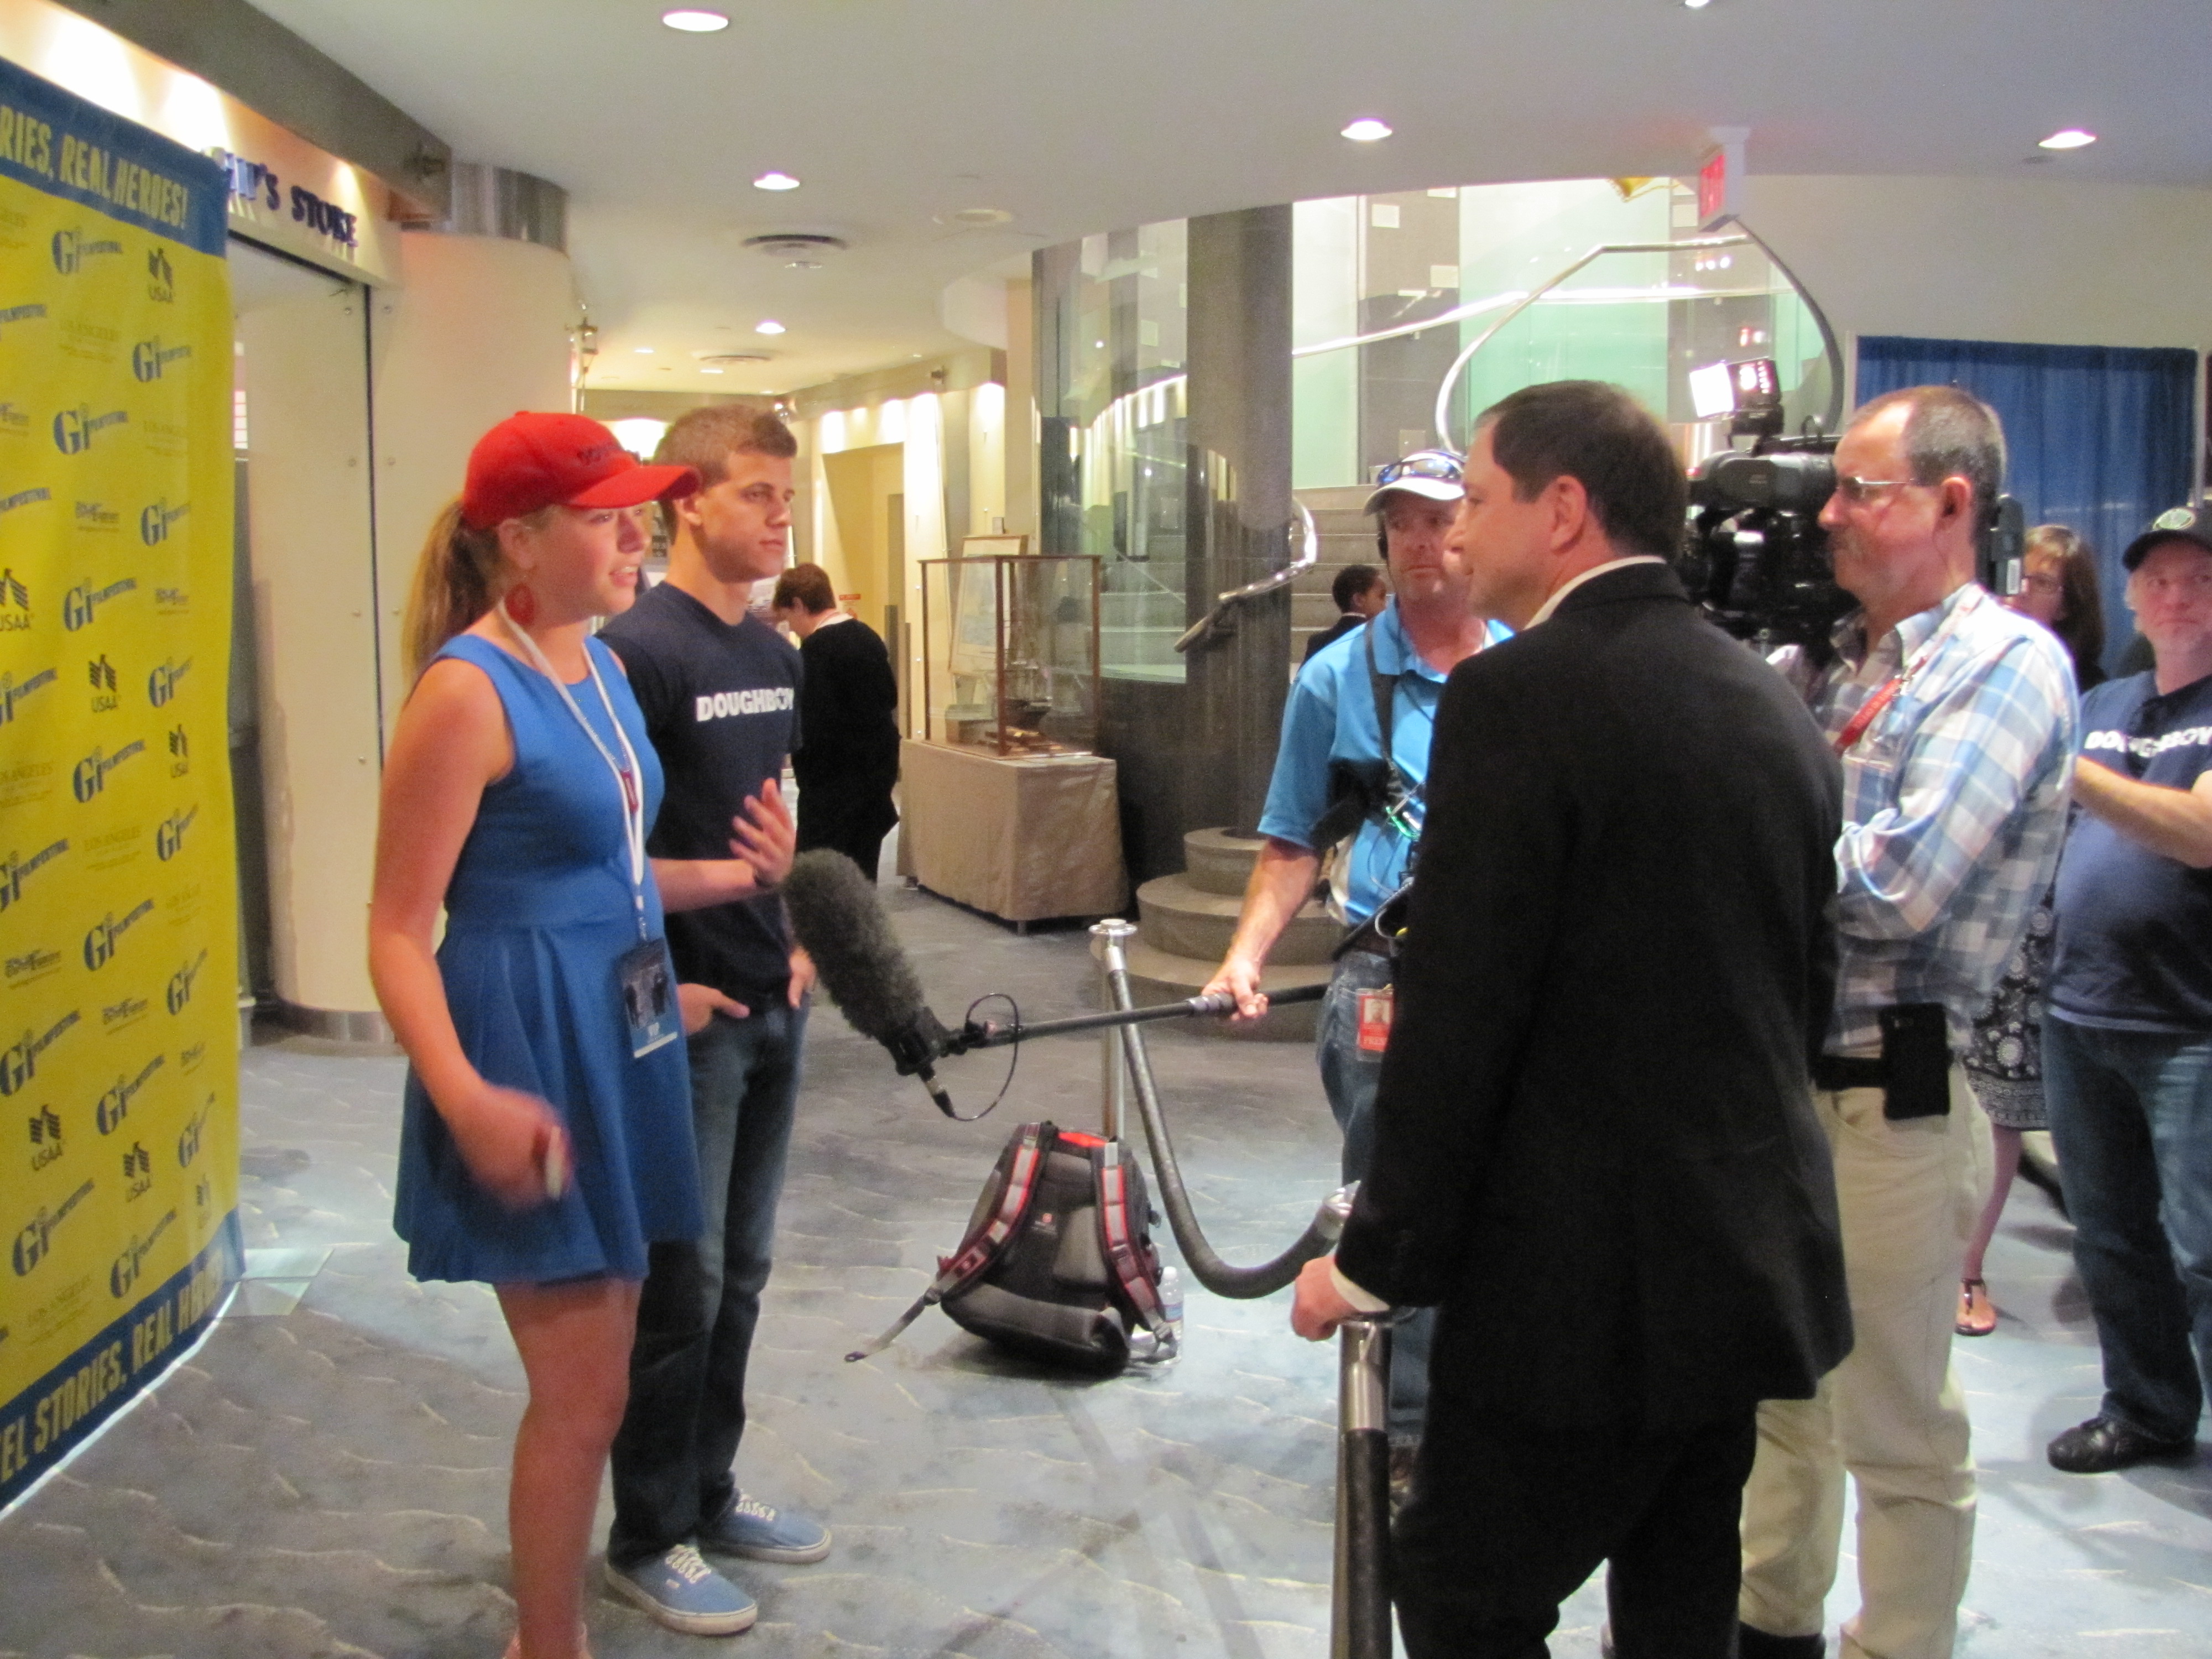 Emily and the press at 2012 GI Film Festival